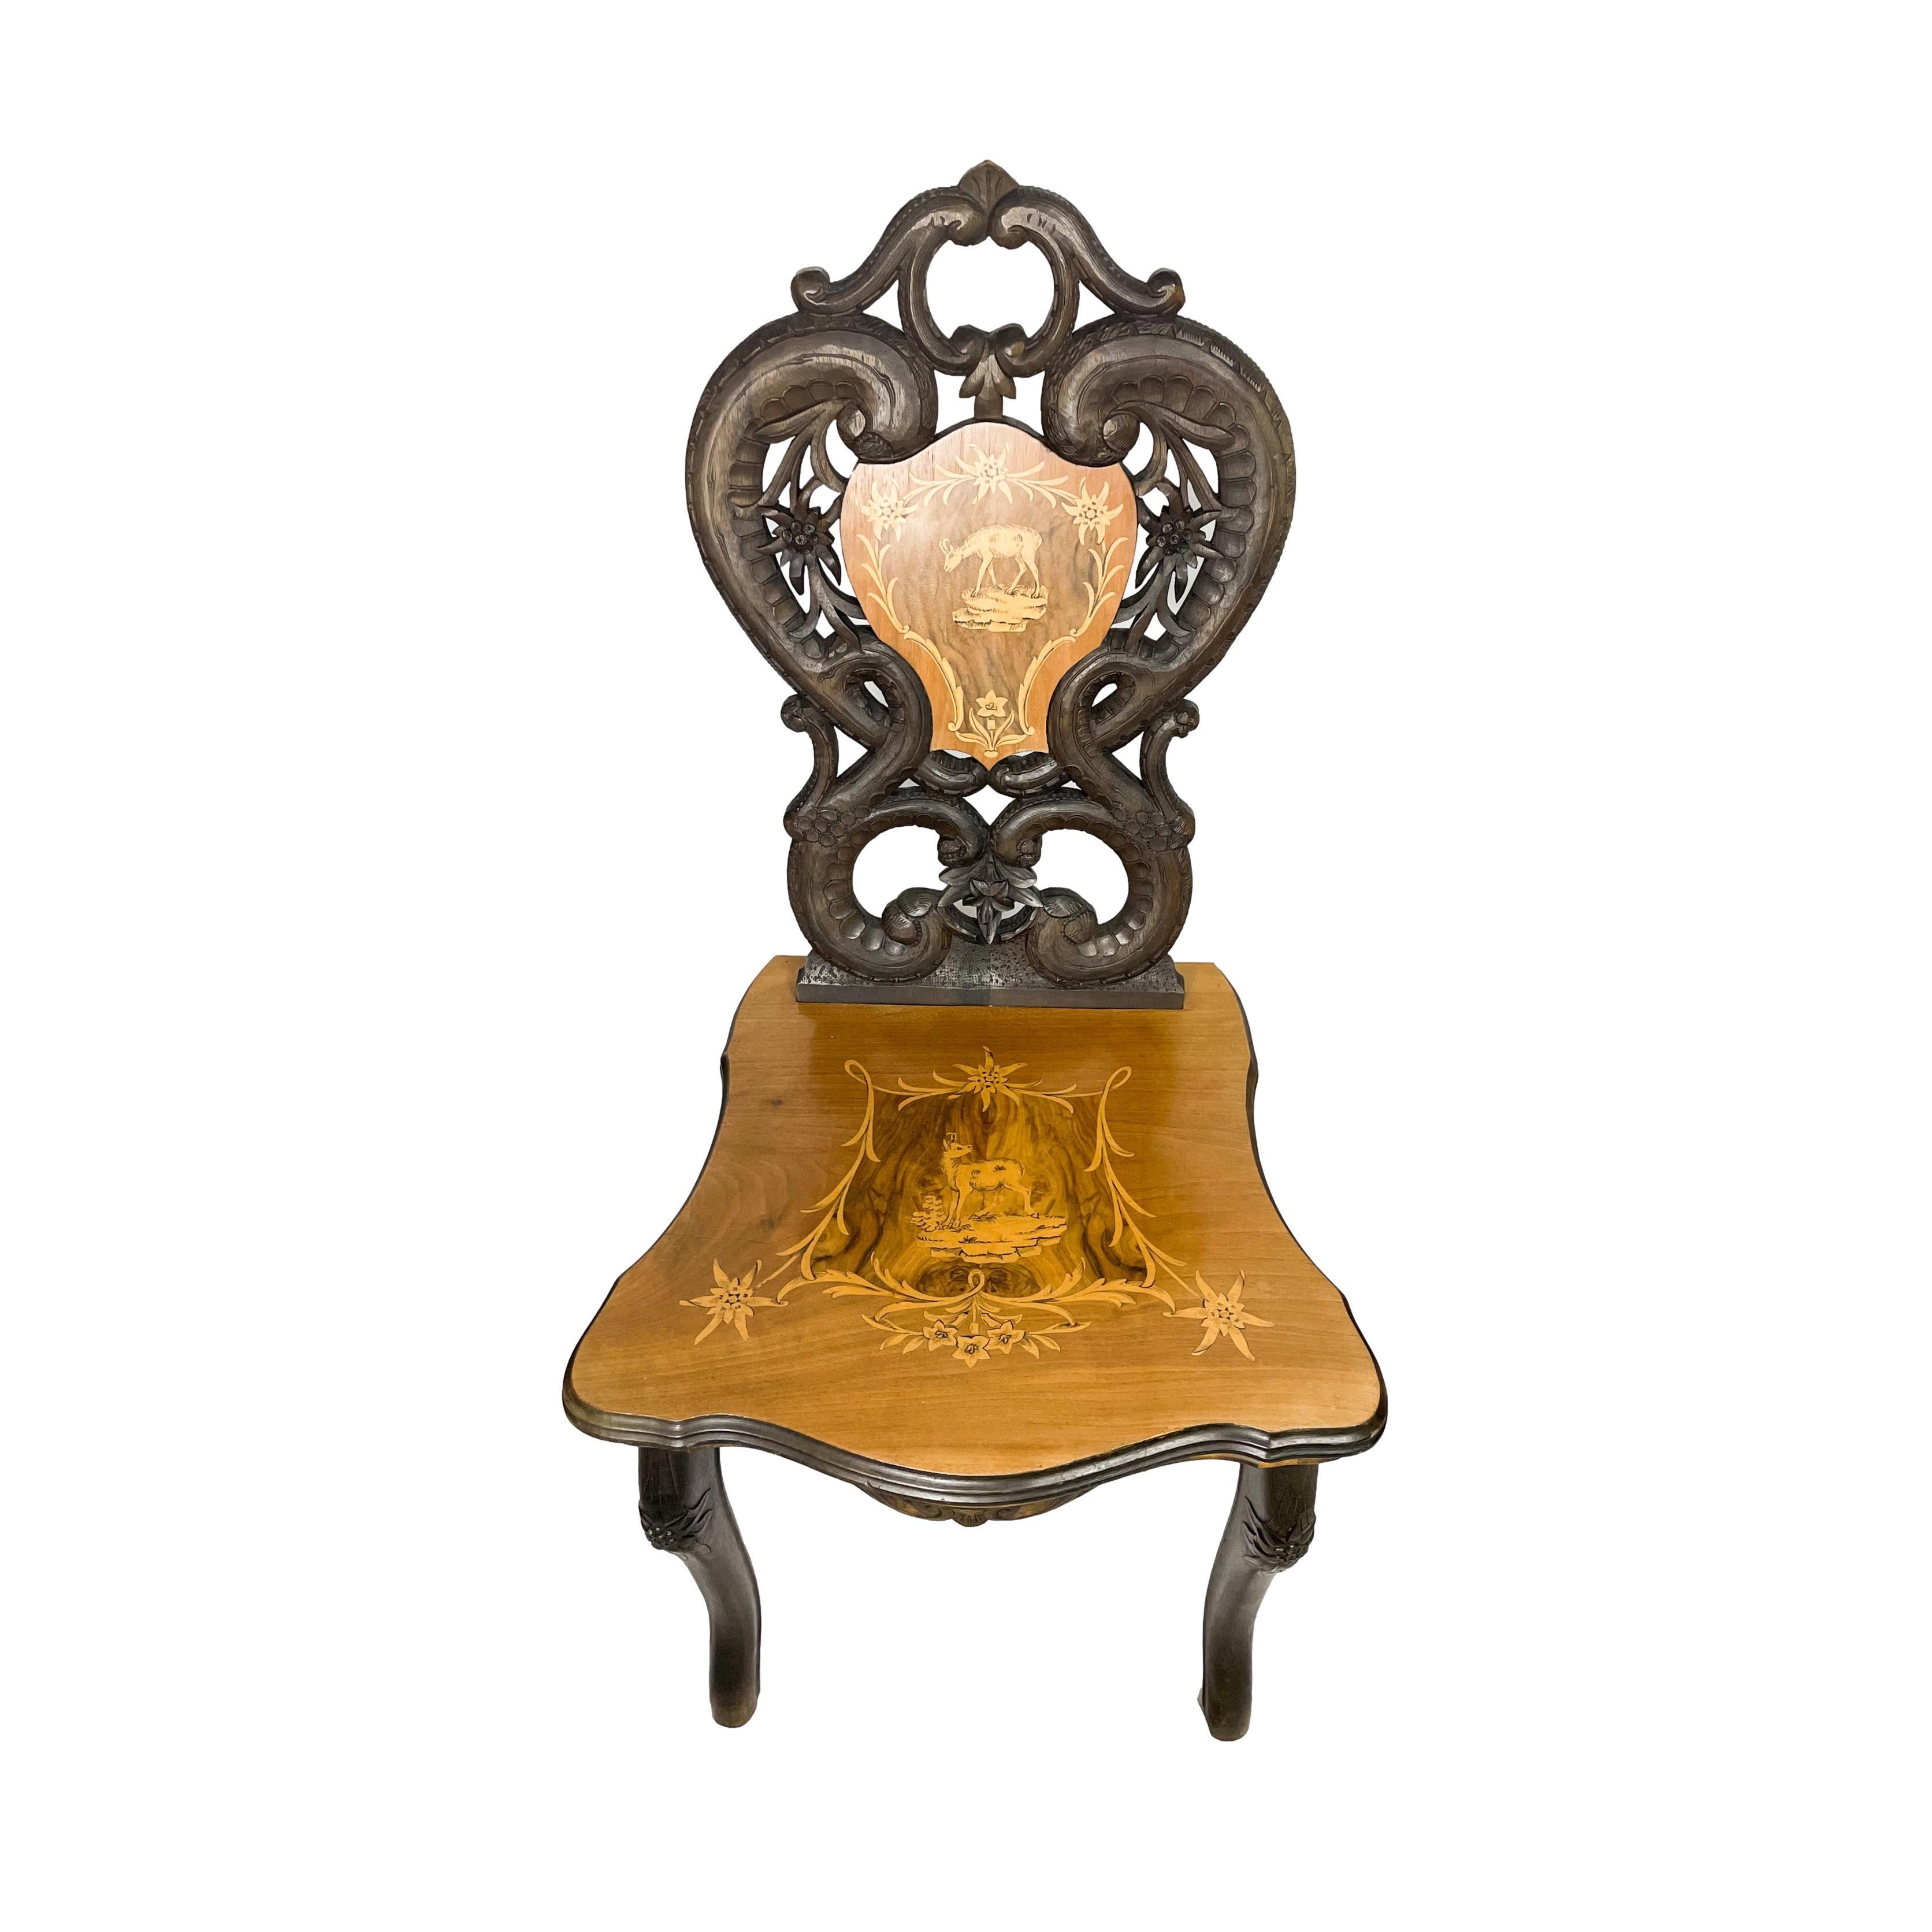 20th Century Black Forest Carved & Intricately Inlaid Walnut Musical Chair, Swiss, Ca. 1900 For Sale